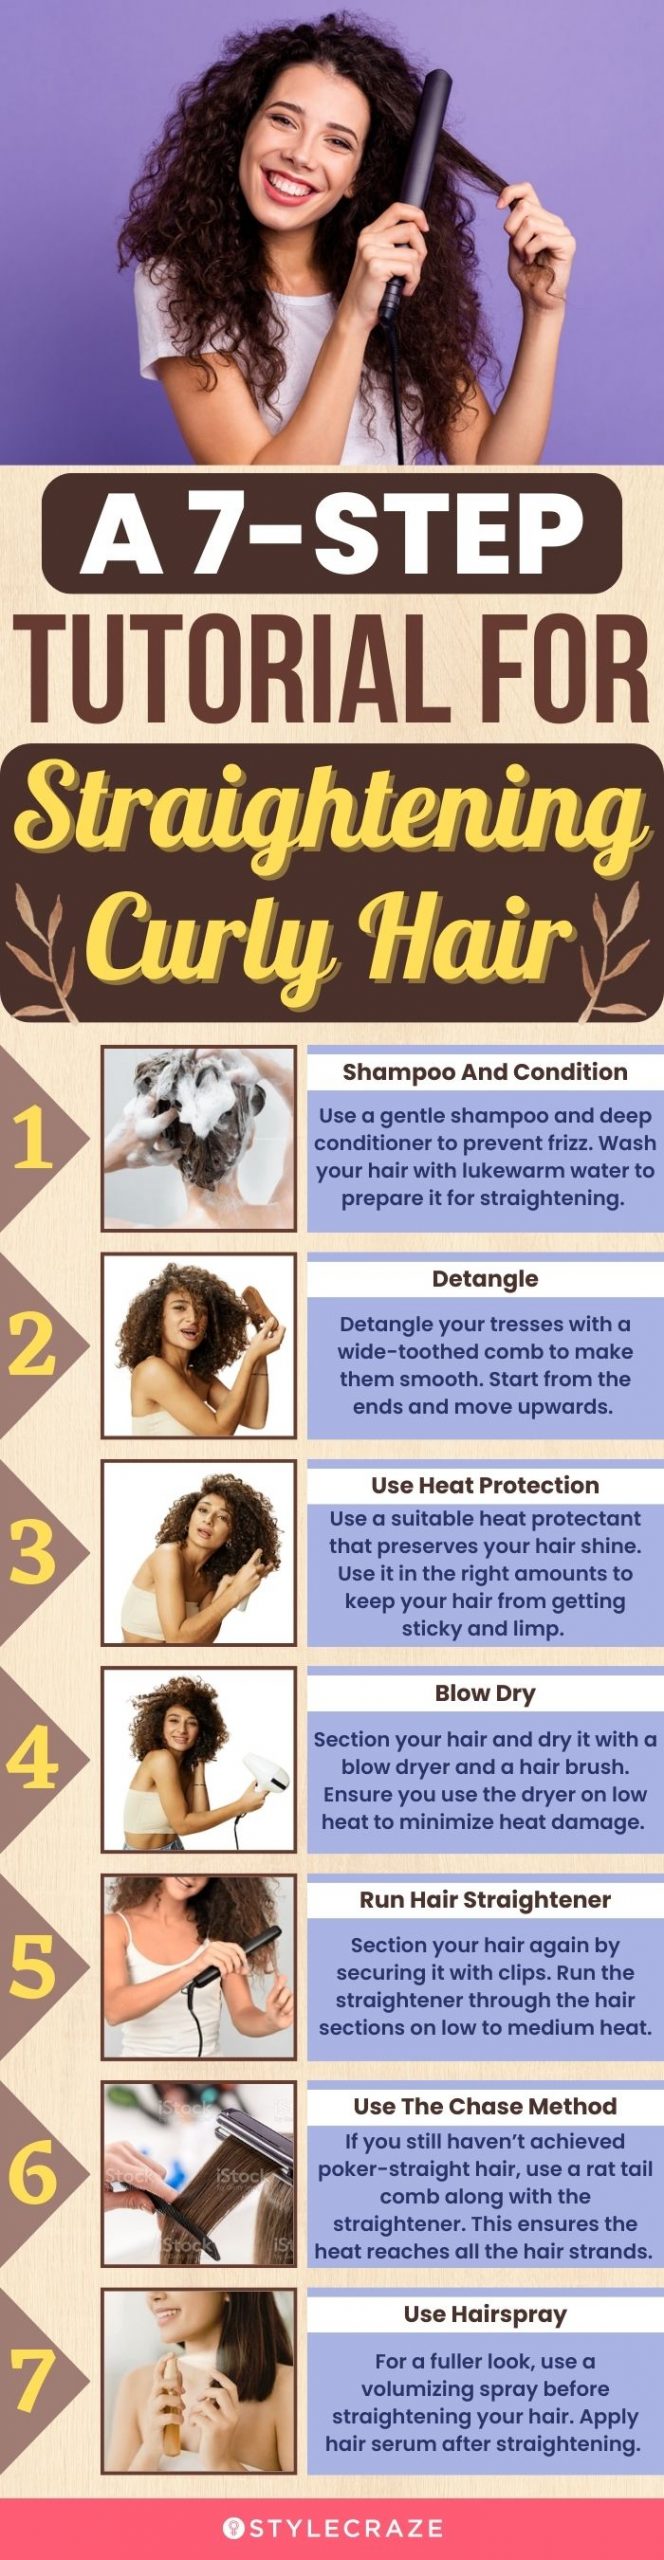 a 7-step tutorial for straightening curly hair (infographic)